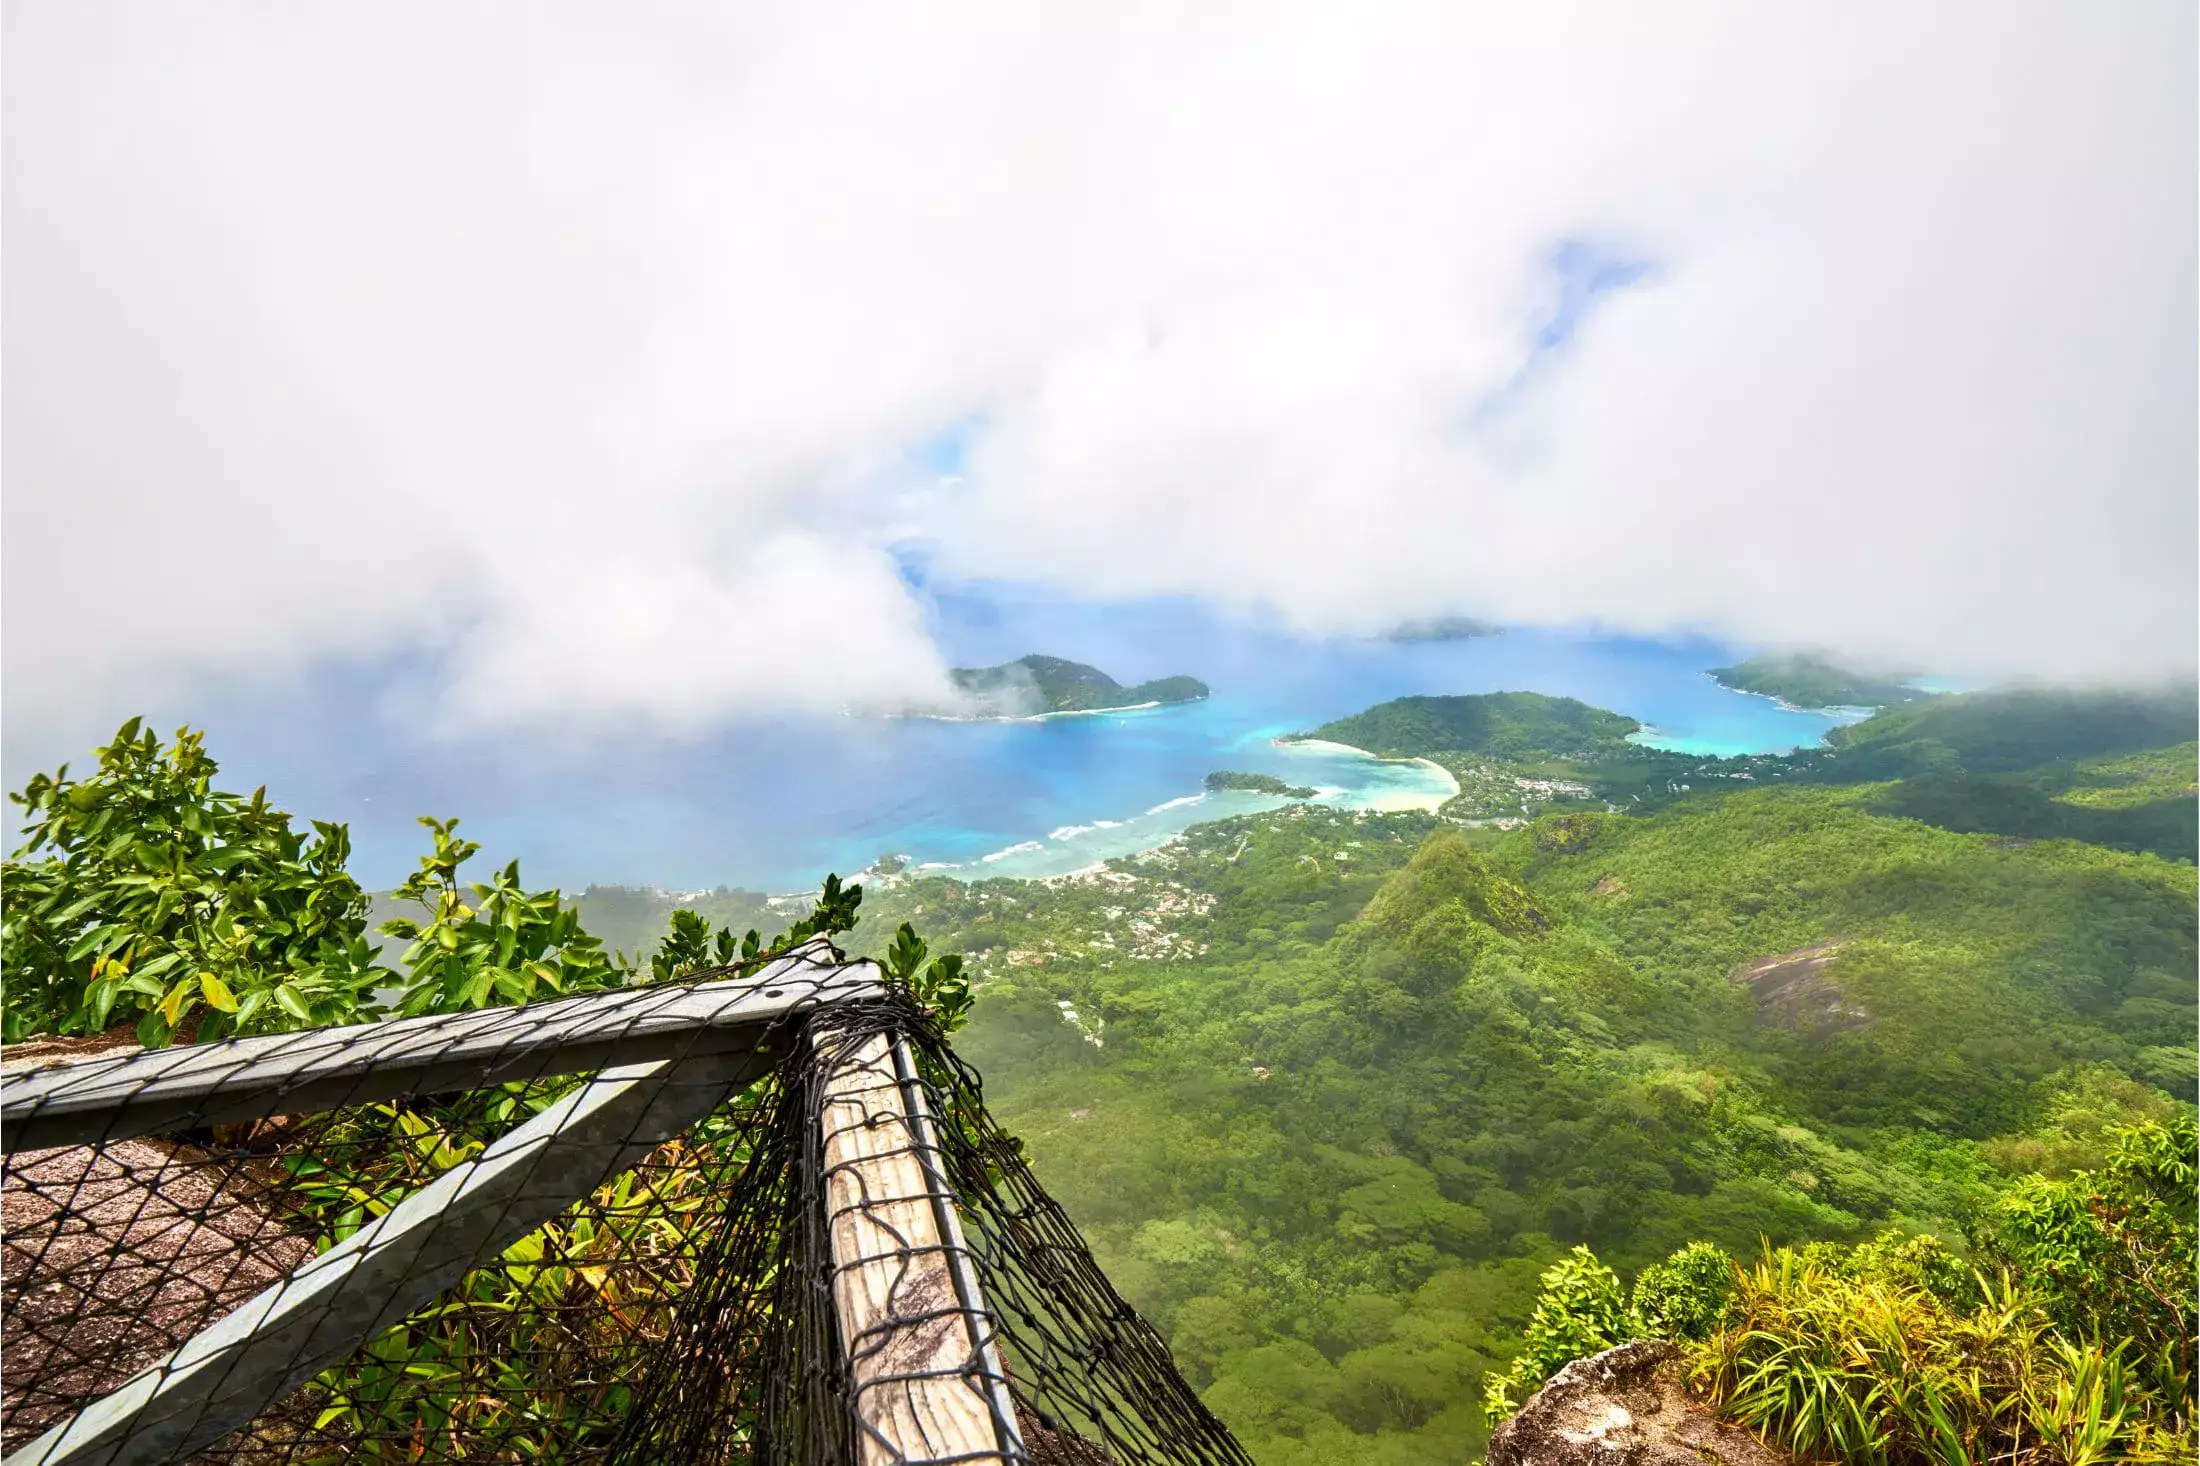 Breathtaking view from atop Morne Blanc Hiking trail in Mahe.